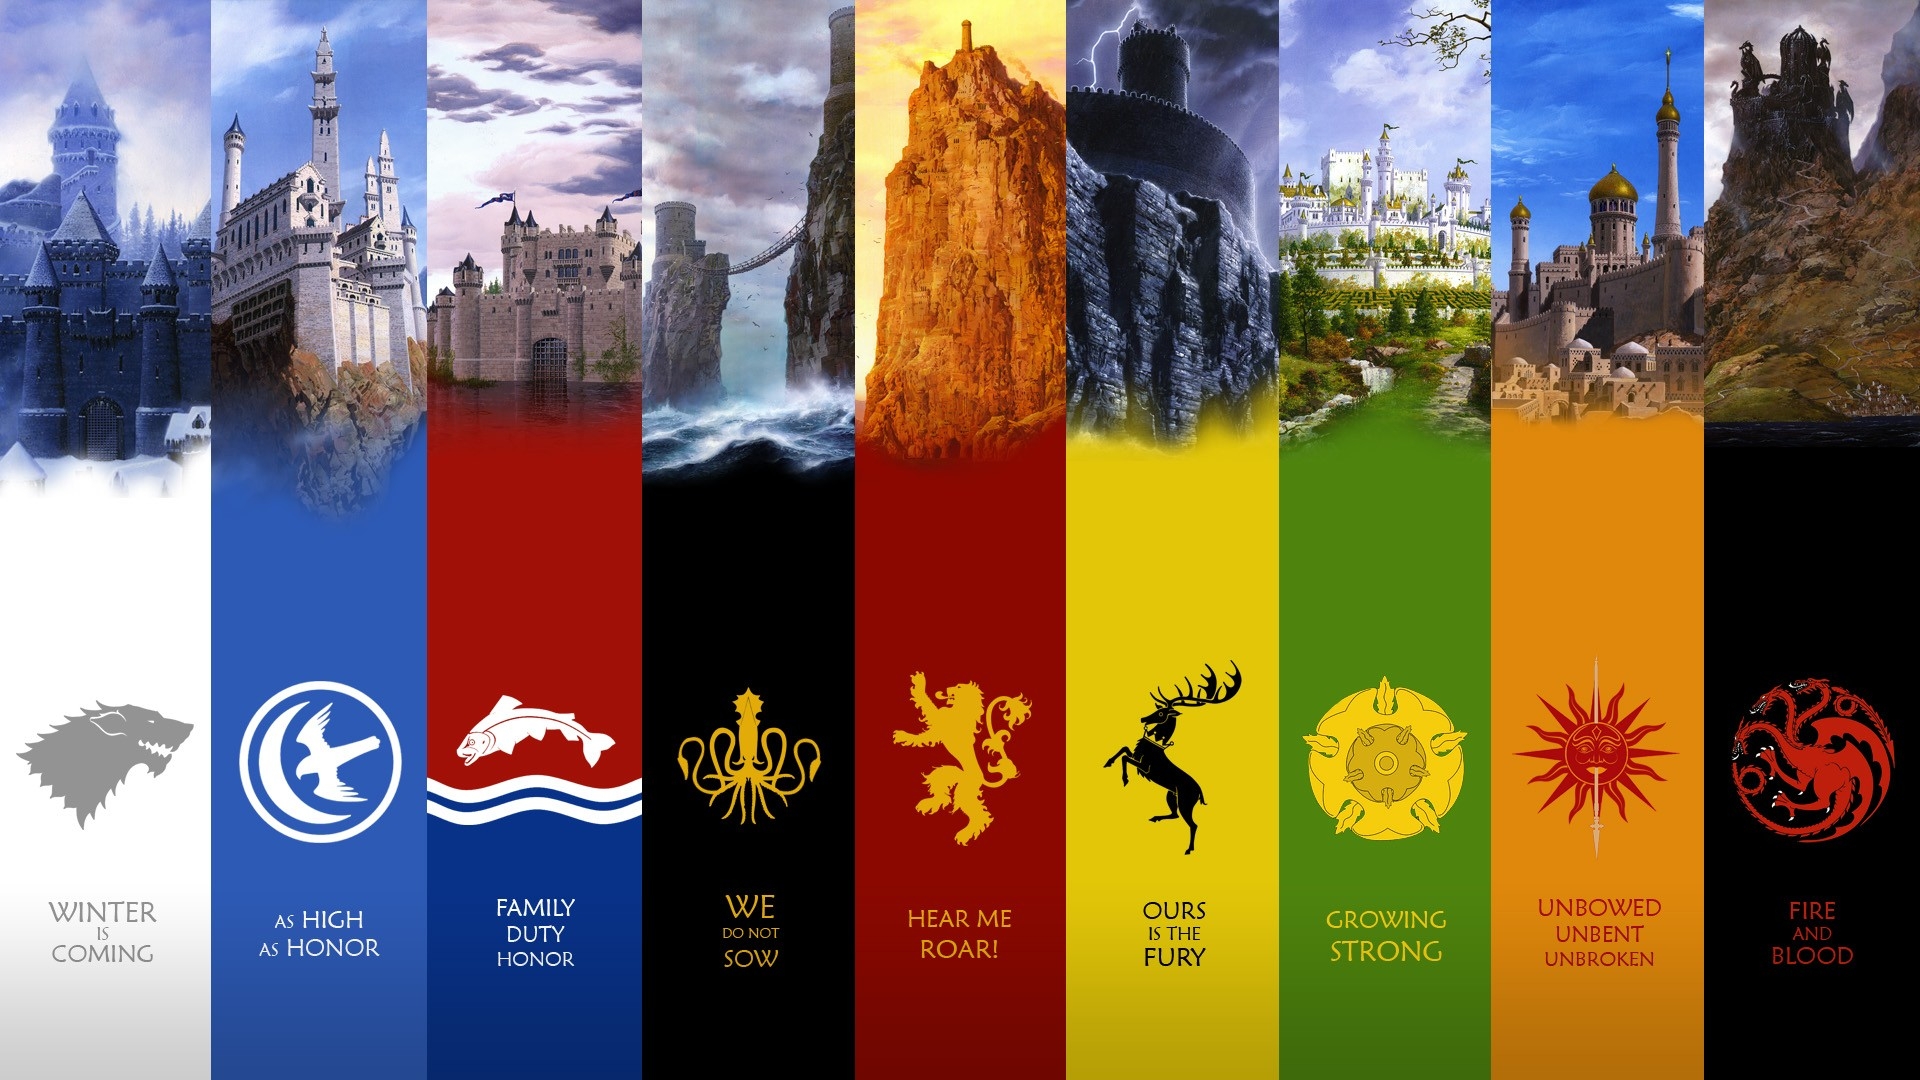 castles, Quotes, Houses, House, Kingdom, Fantasy, Art, Game, Of, Thrones, Emblem, A, Song, Of, Ice, And, Fire, George, R, R, Martin, Mormont, Greyjoy, Lannister, Stark, Targaryen, Baratheon, Tully Wallpaper